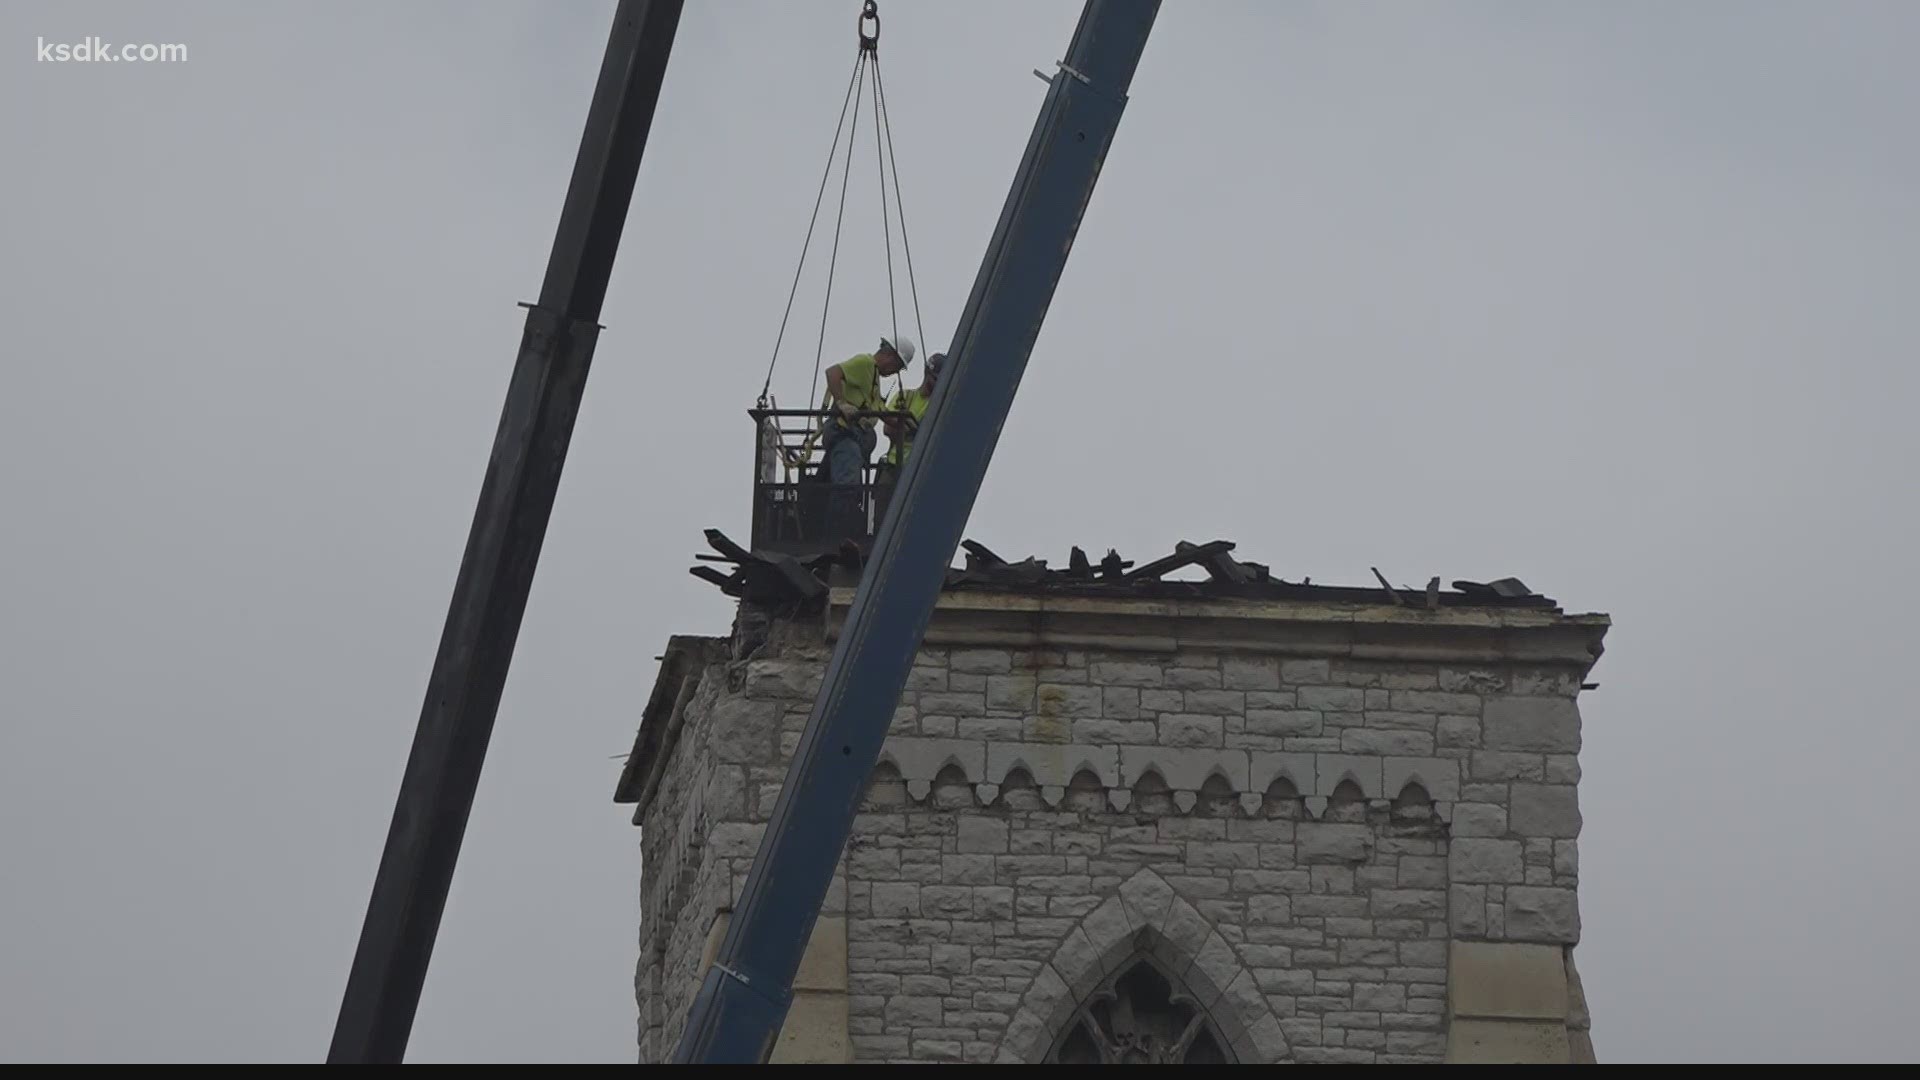 High winds early Saturday morning blew the steeple off Centenary United Methodist Church in downtown St. Louis